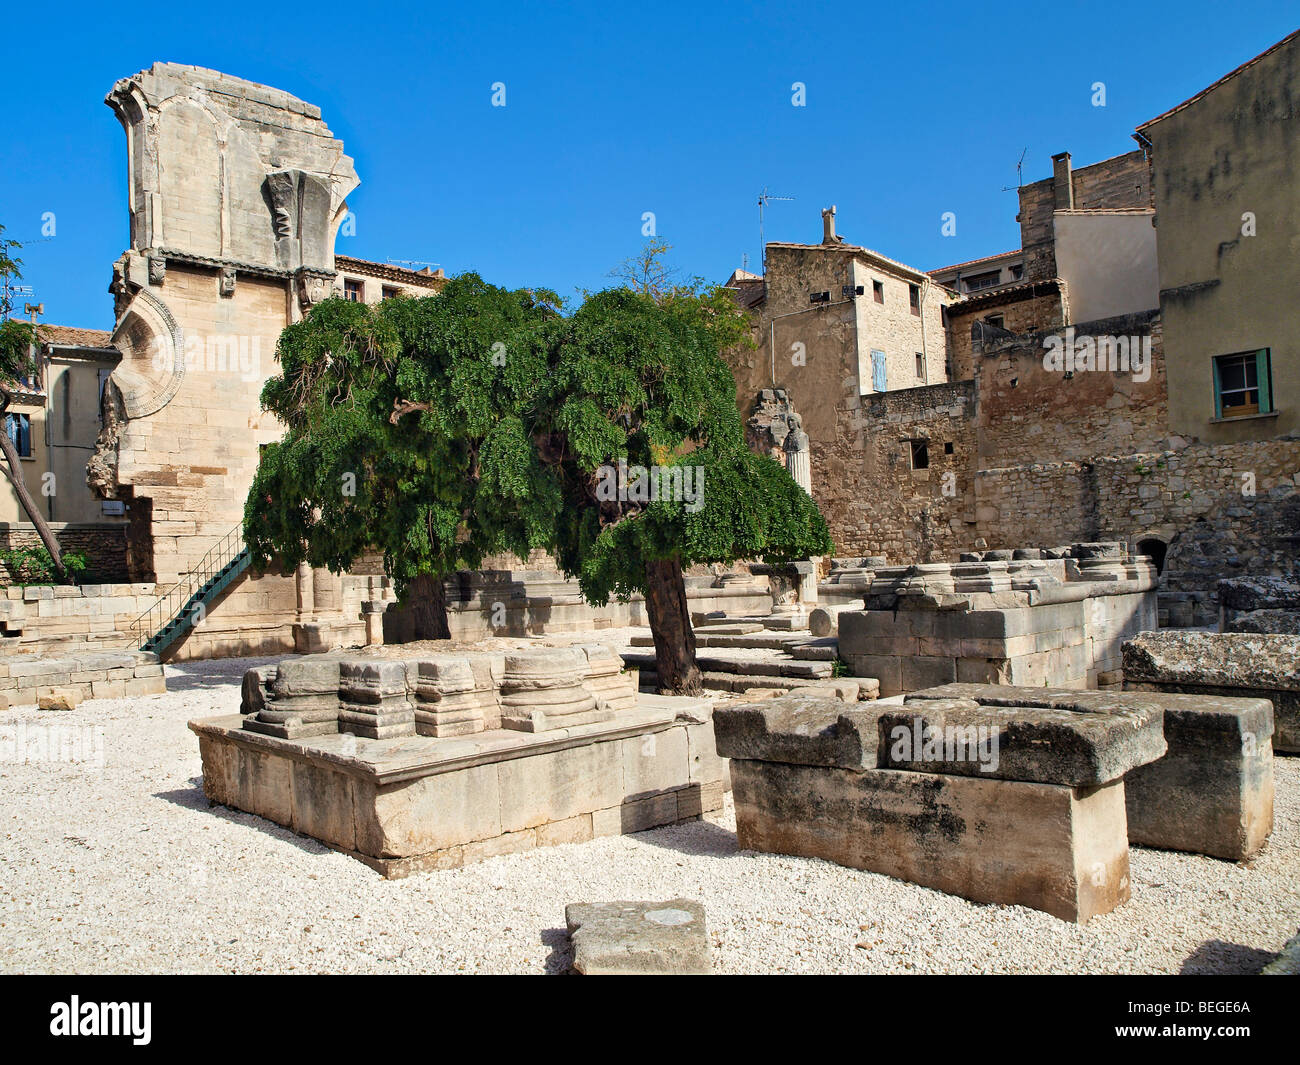 The Saint Gilles monastory and abbey, France. Stock Photo